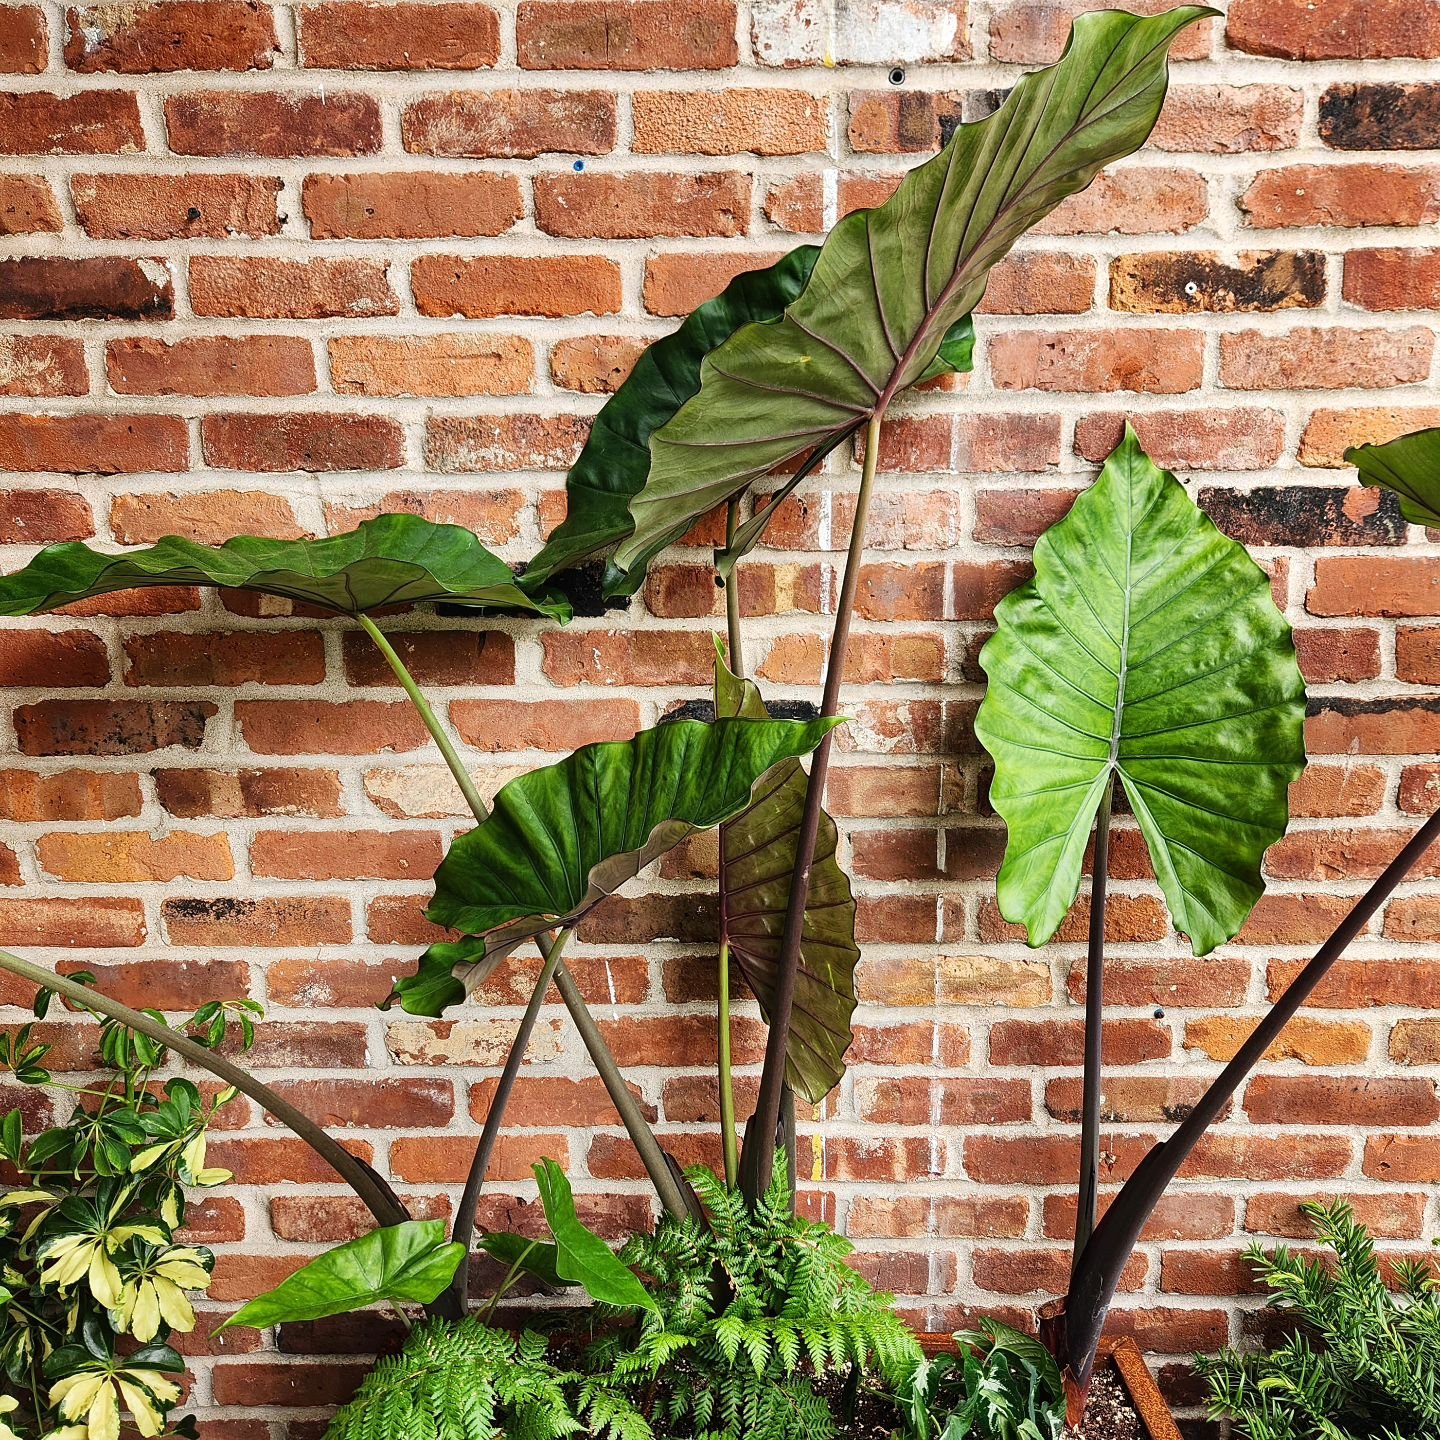 It's finally that time of the year when your indoor plants can safely move outside for the summer!! 🌿🖤

Our tropical collection we care for so much indoors all winter will absolutely love their summer outside and reward you with amazing new growth!